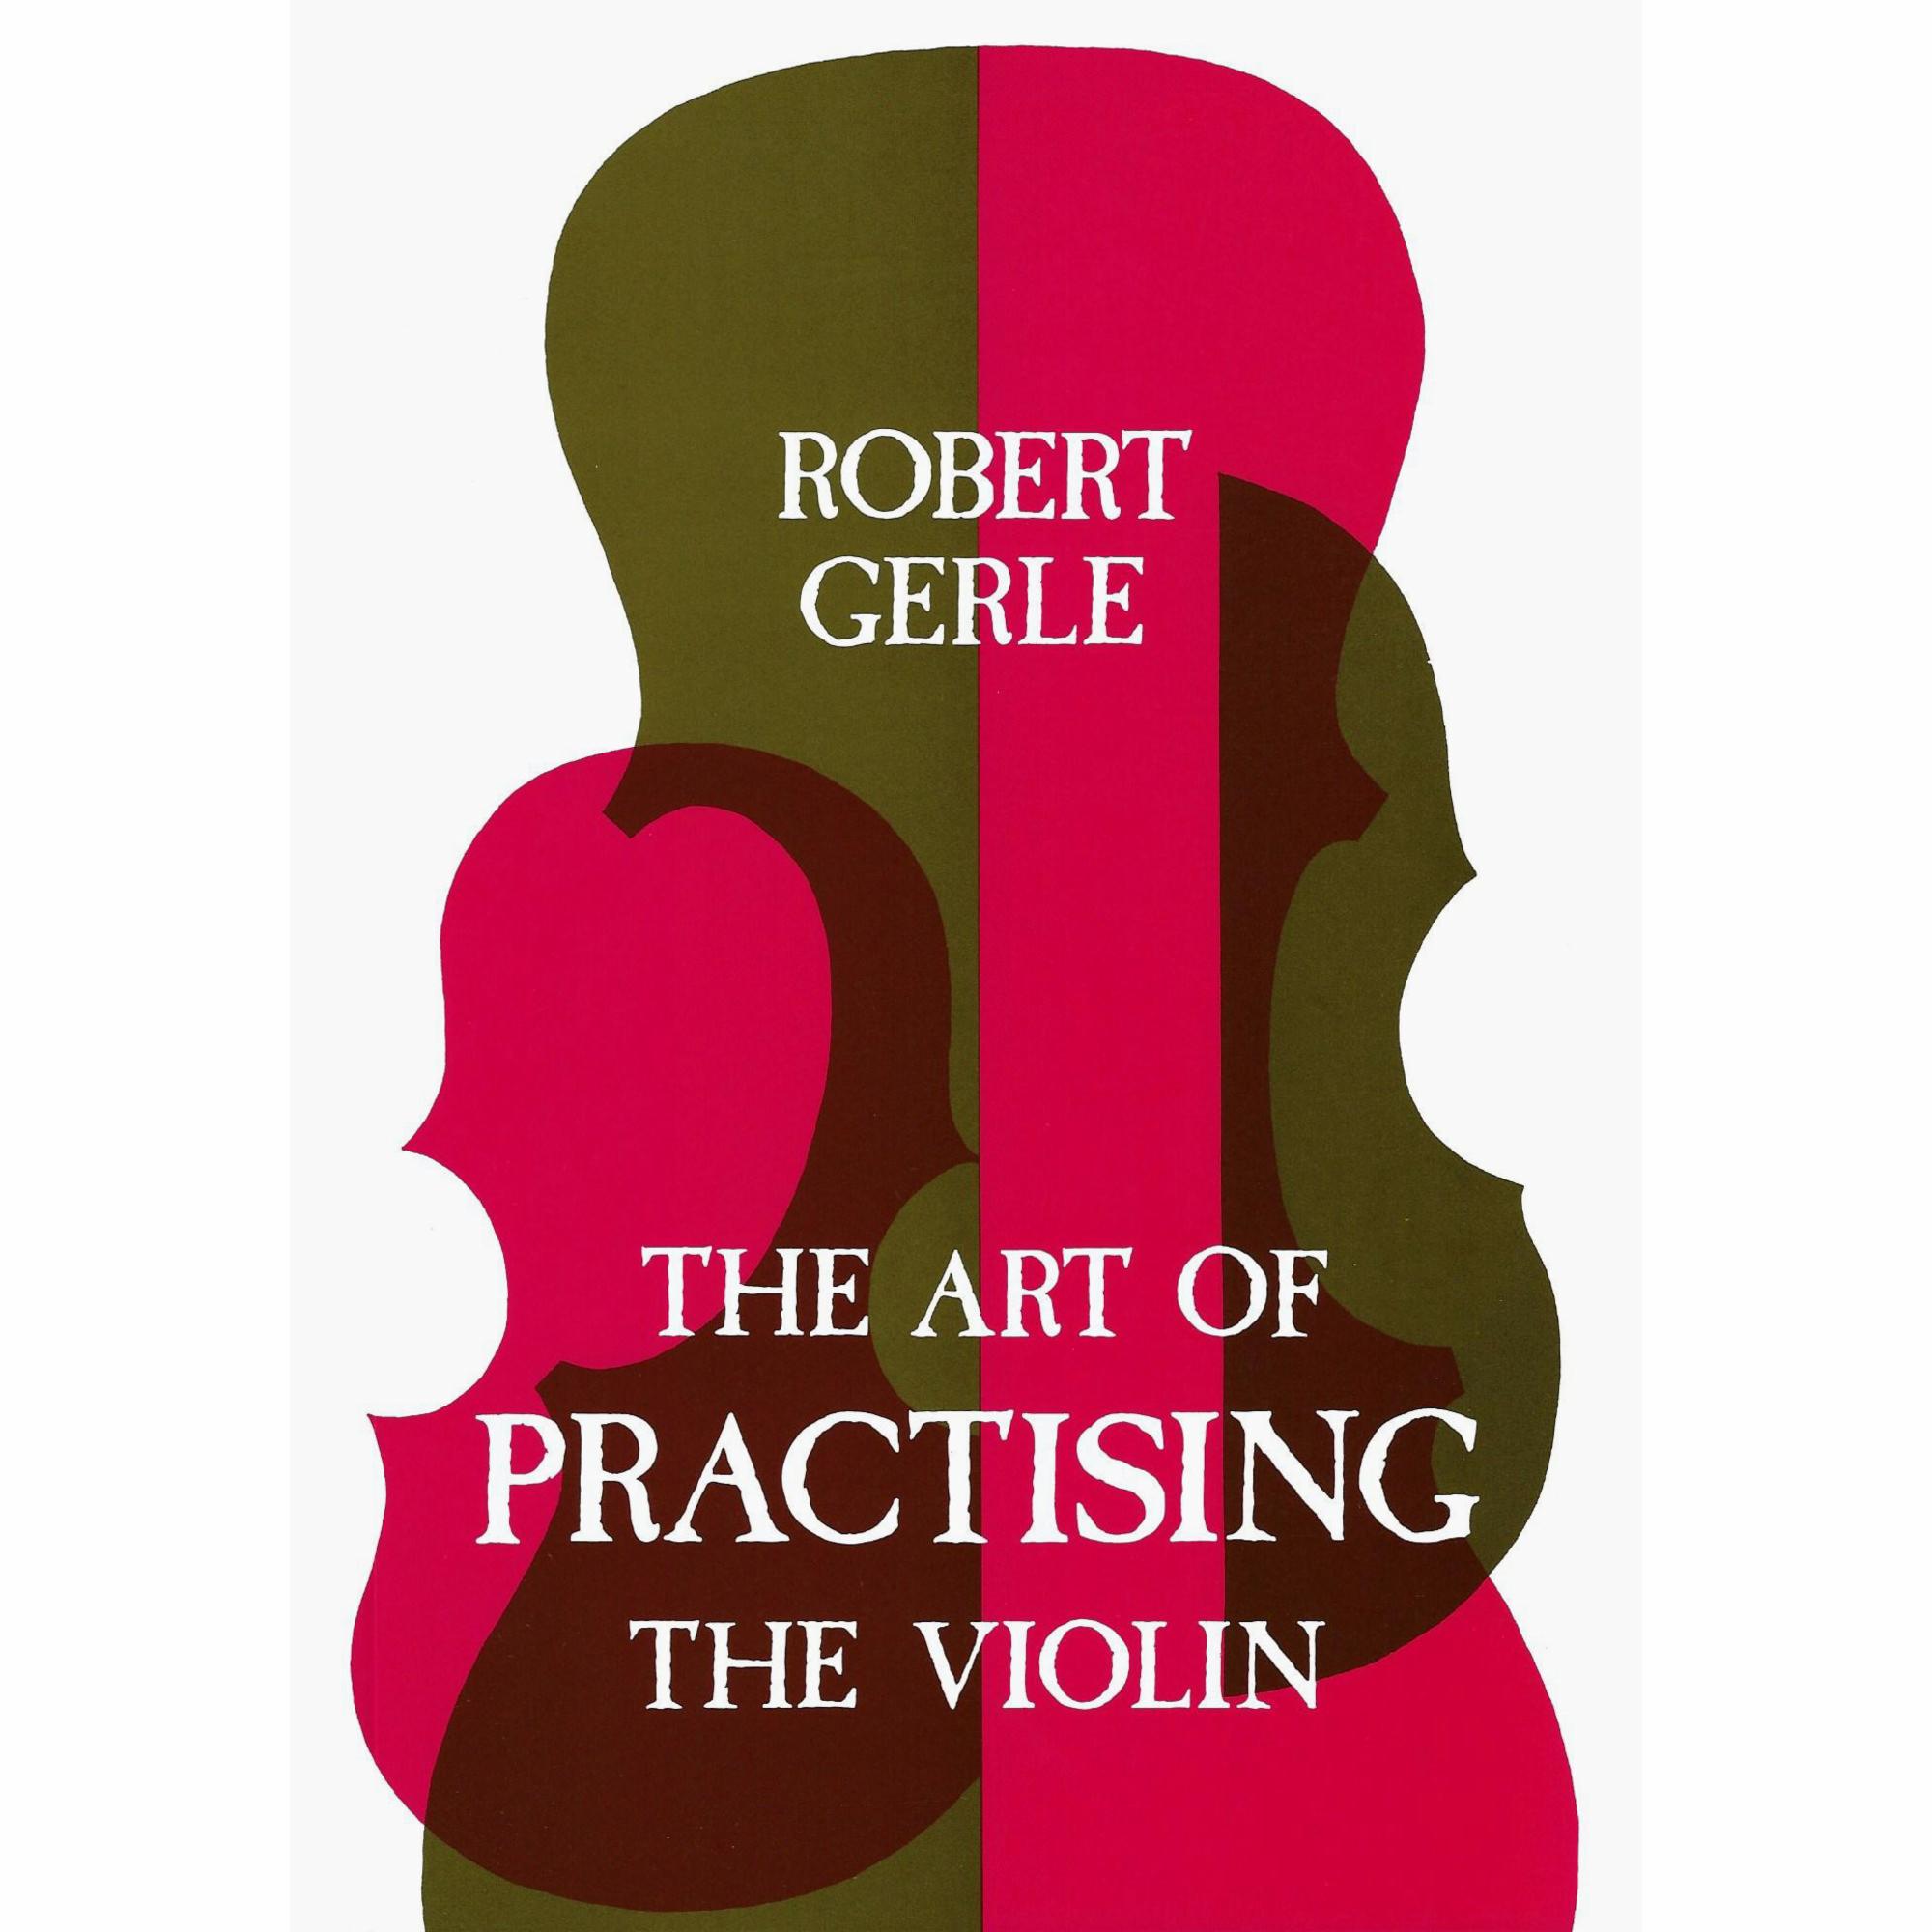 The Art of Practising the Violin